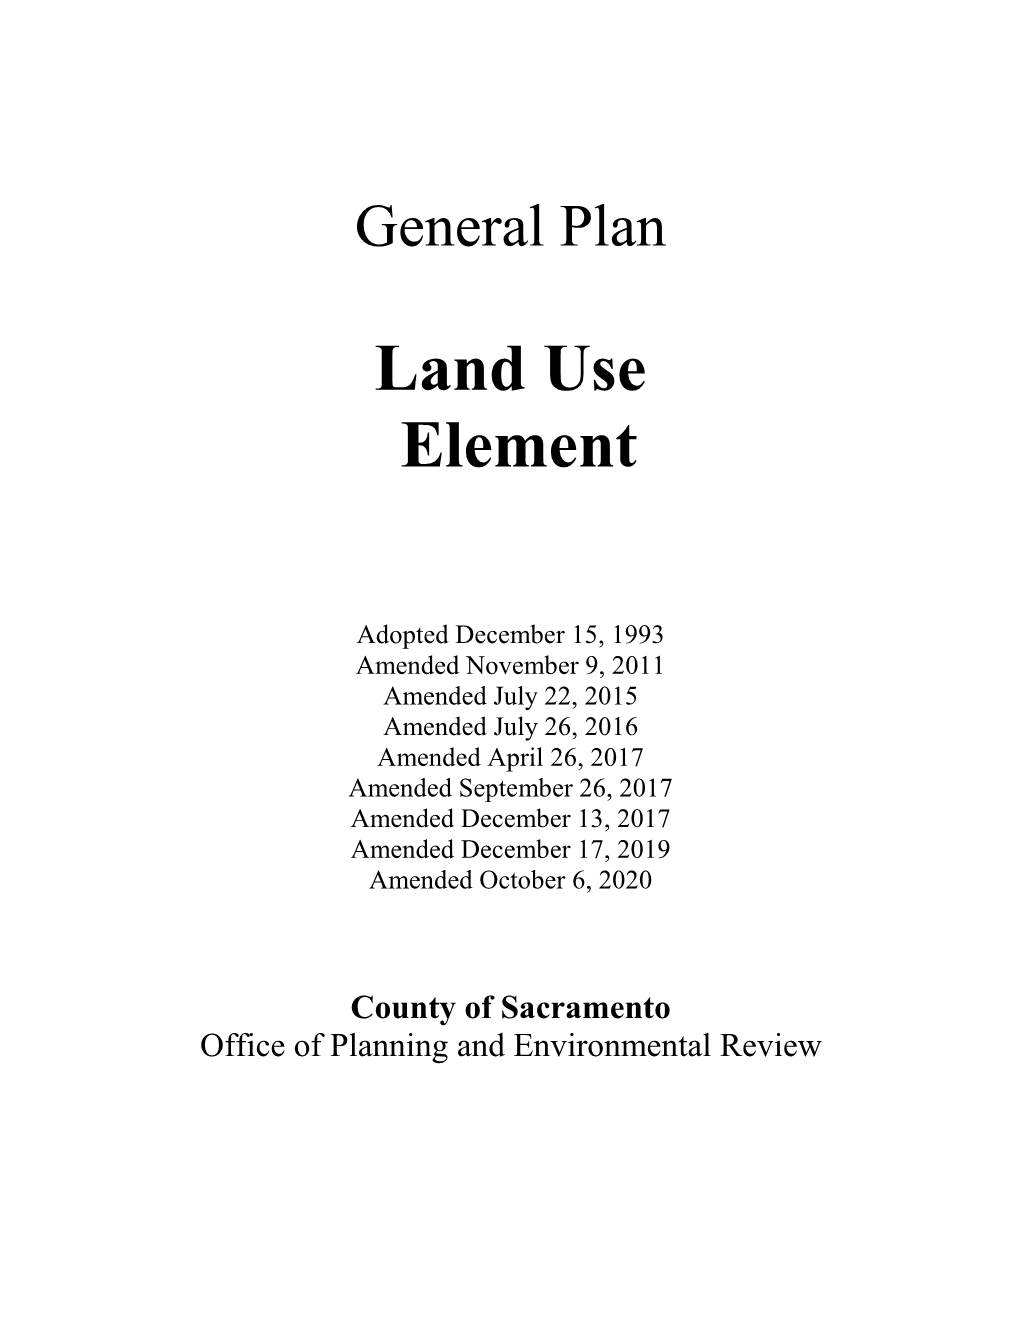 Land Use Element of the General Plan